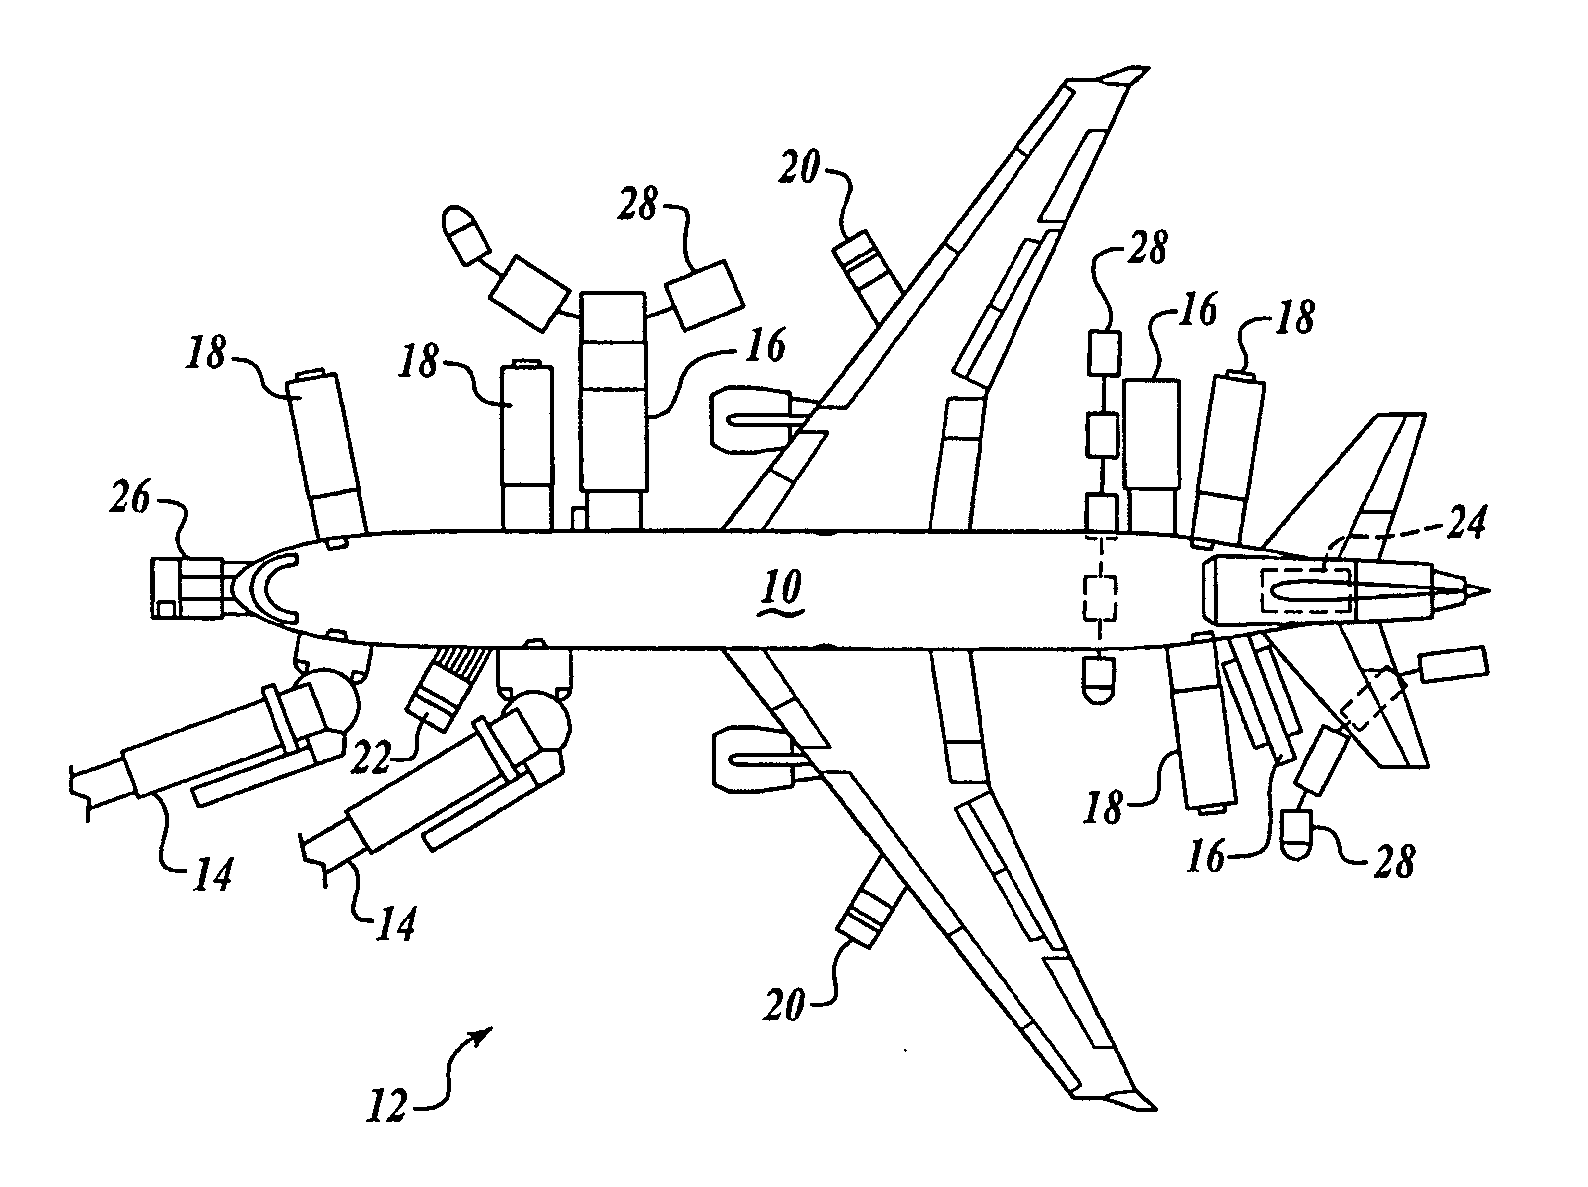 Ground vehicle collision prevention systems and methods